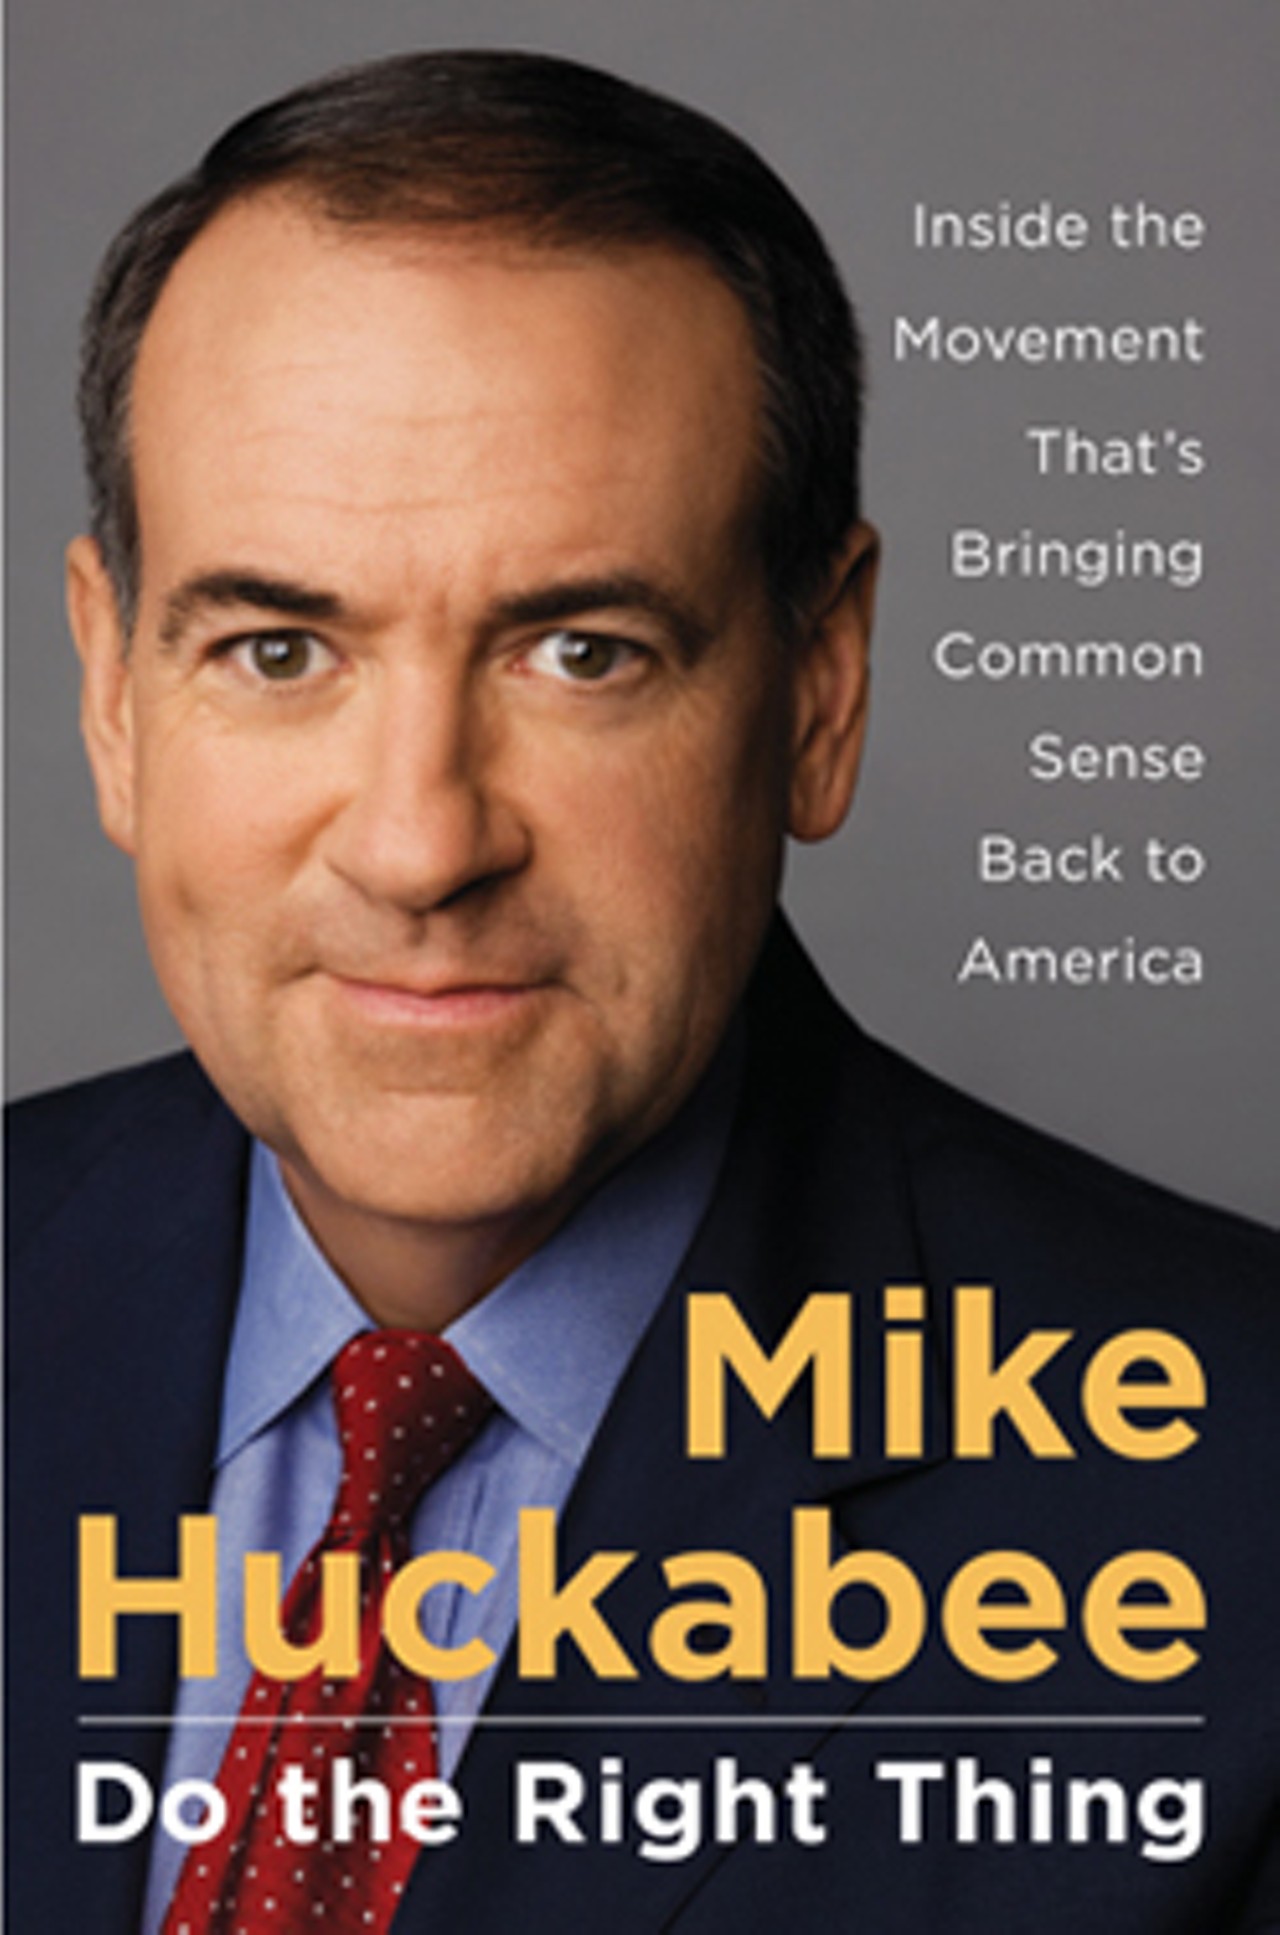 Huck
The audiobook of Do the Right Thing by Mike Huckabee, as read by Mike Huckabee. (six hours on five CD's!) Just stick to Spike Lee's Do the Right Thing, or spend the money on some sweet flicks by Huck's pal, Chuck Norris (try Delta Force.)